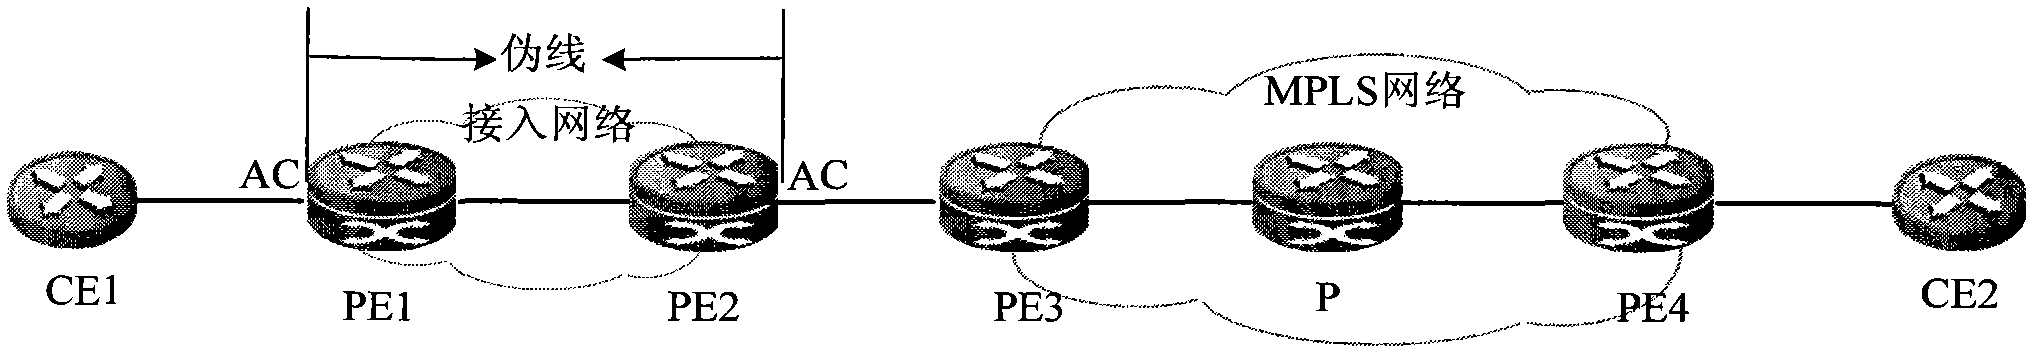 Method for extending MPLS VPN access through public network and PE equipment